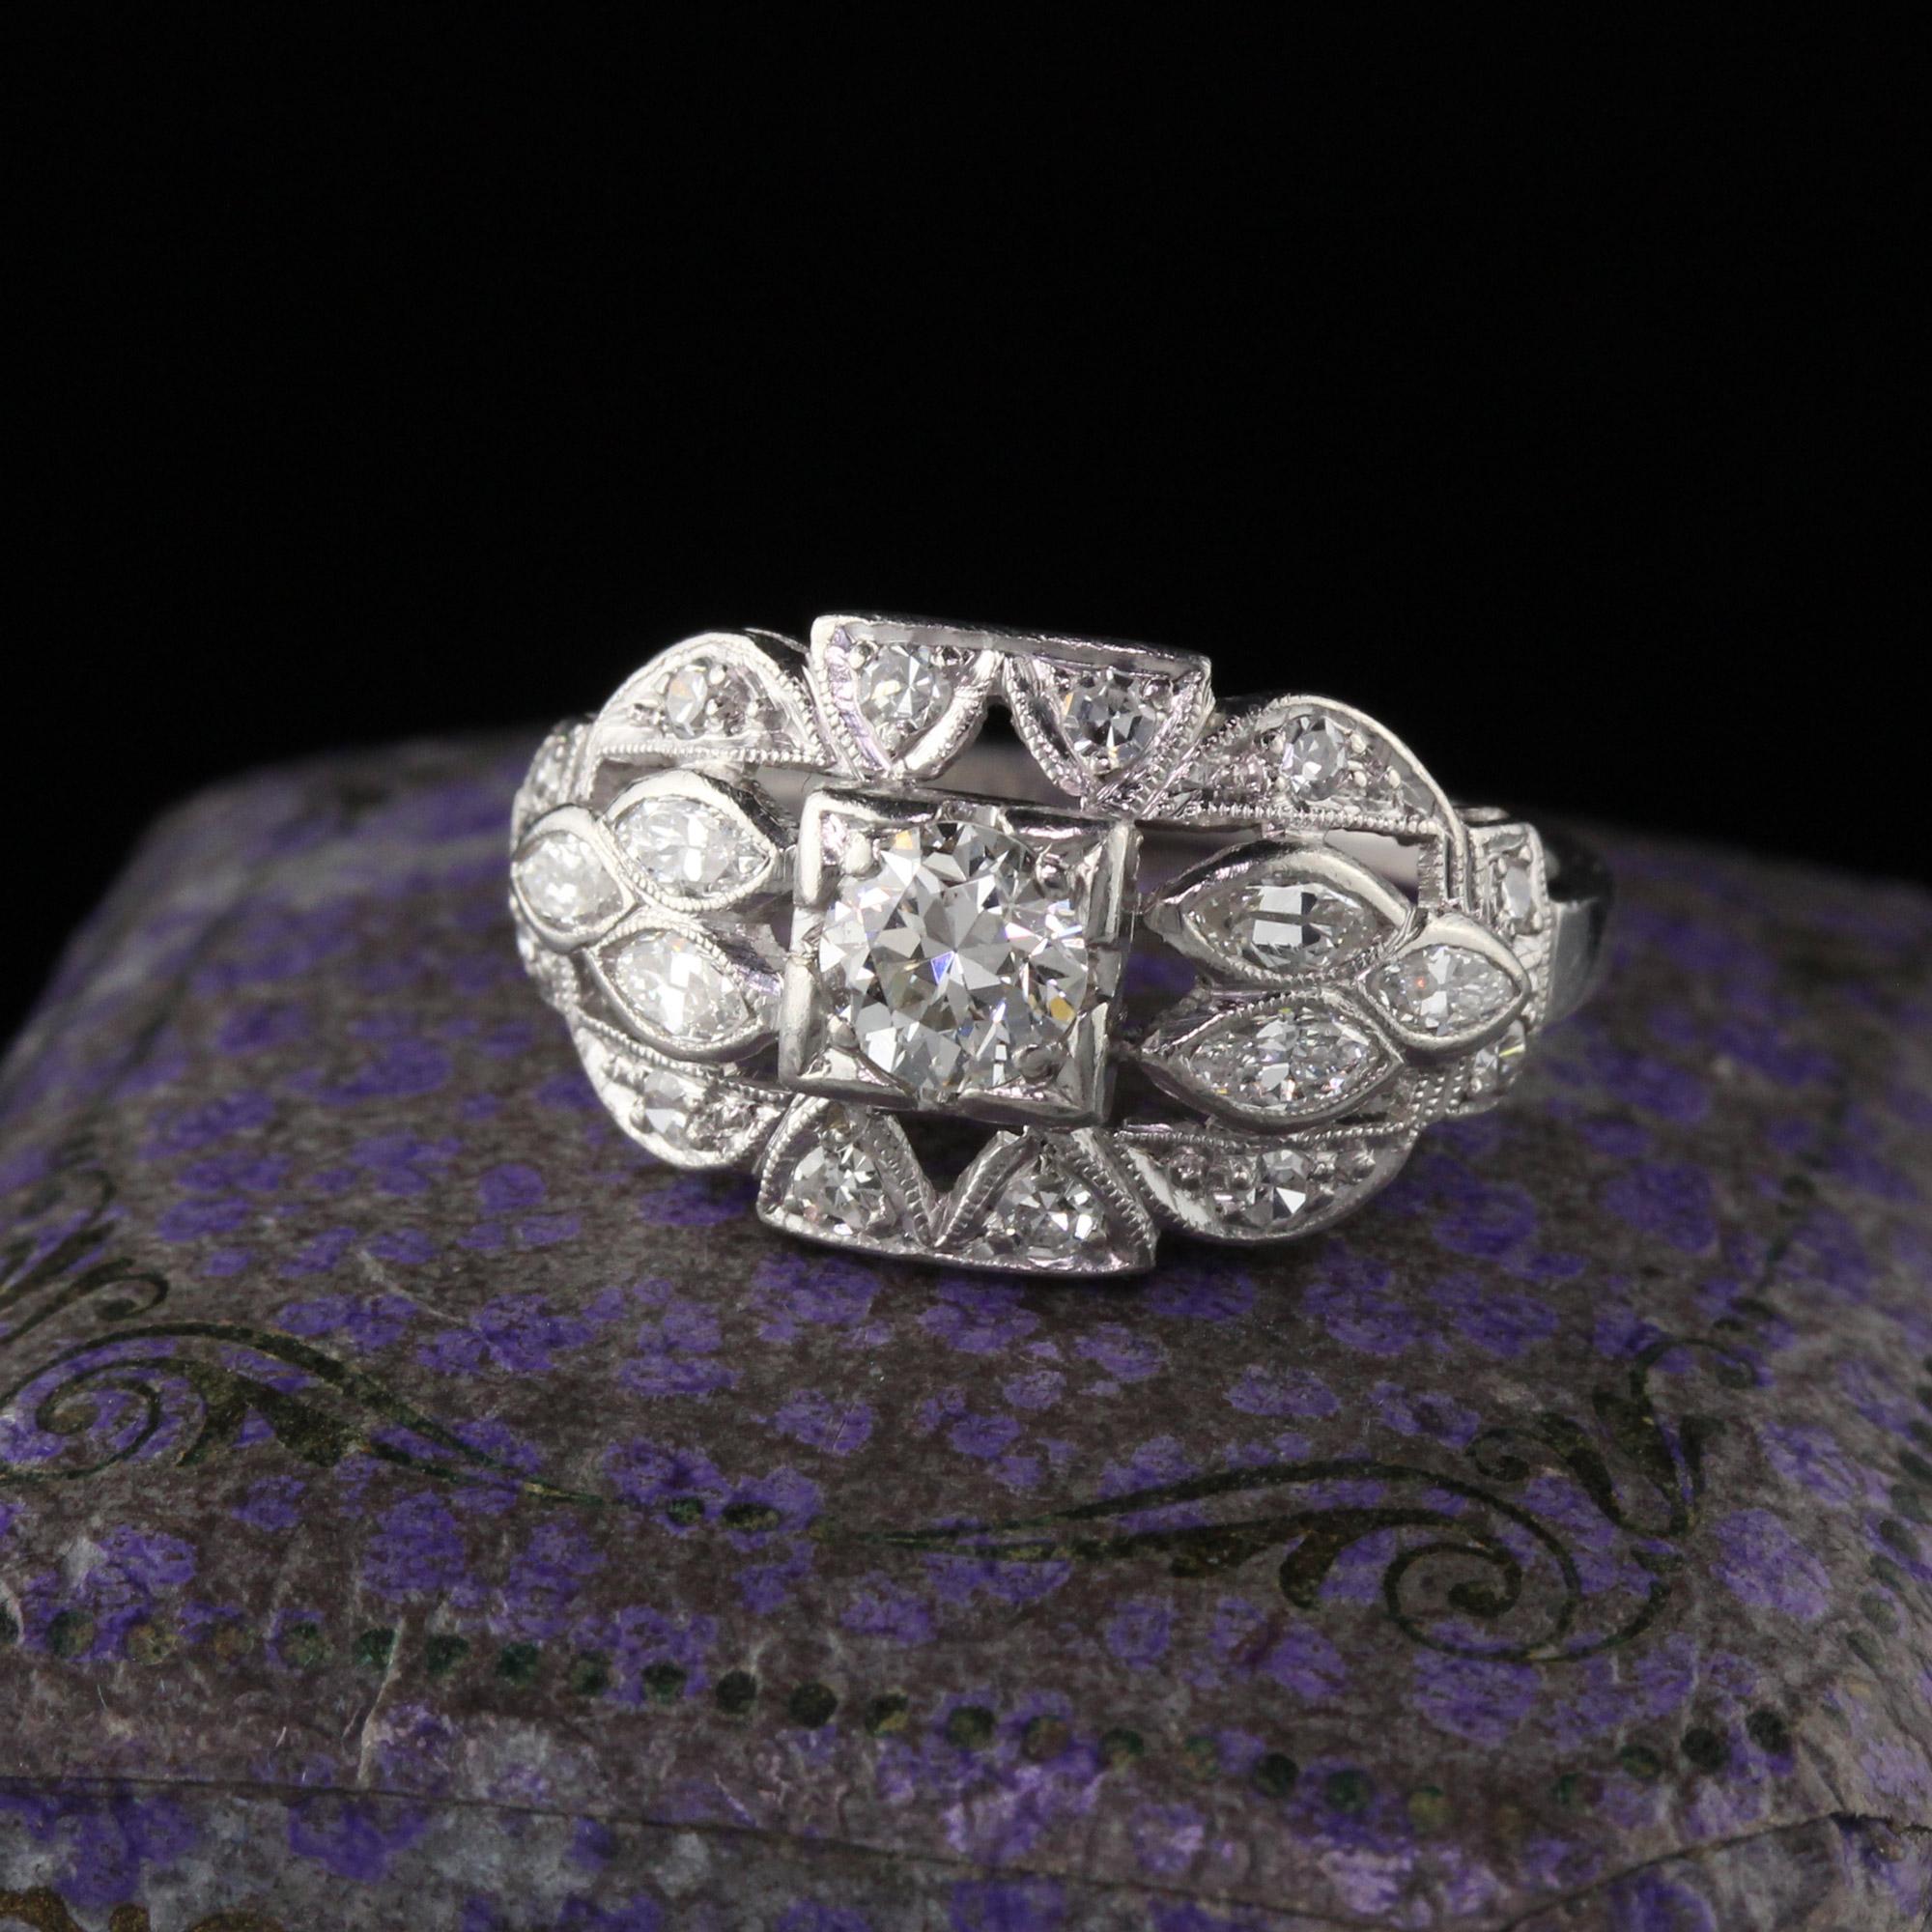 Stunning Art Deco engagement ring featuring an old european cut diamond in the center with old marquise and single cut diamonds. Beautiful geometric design typical to the era. Wraps beautifully around the finger.

#R0310

Metal: Platinum

Weight: